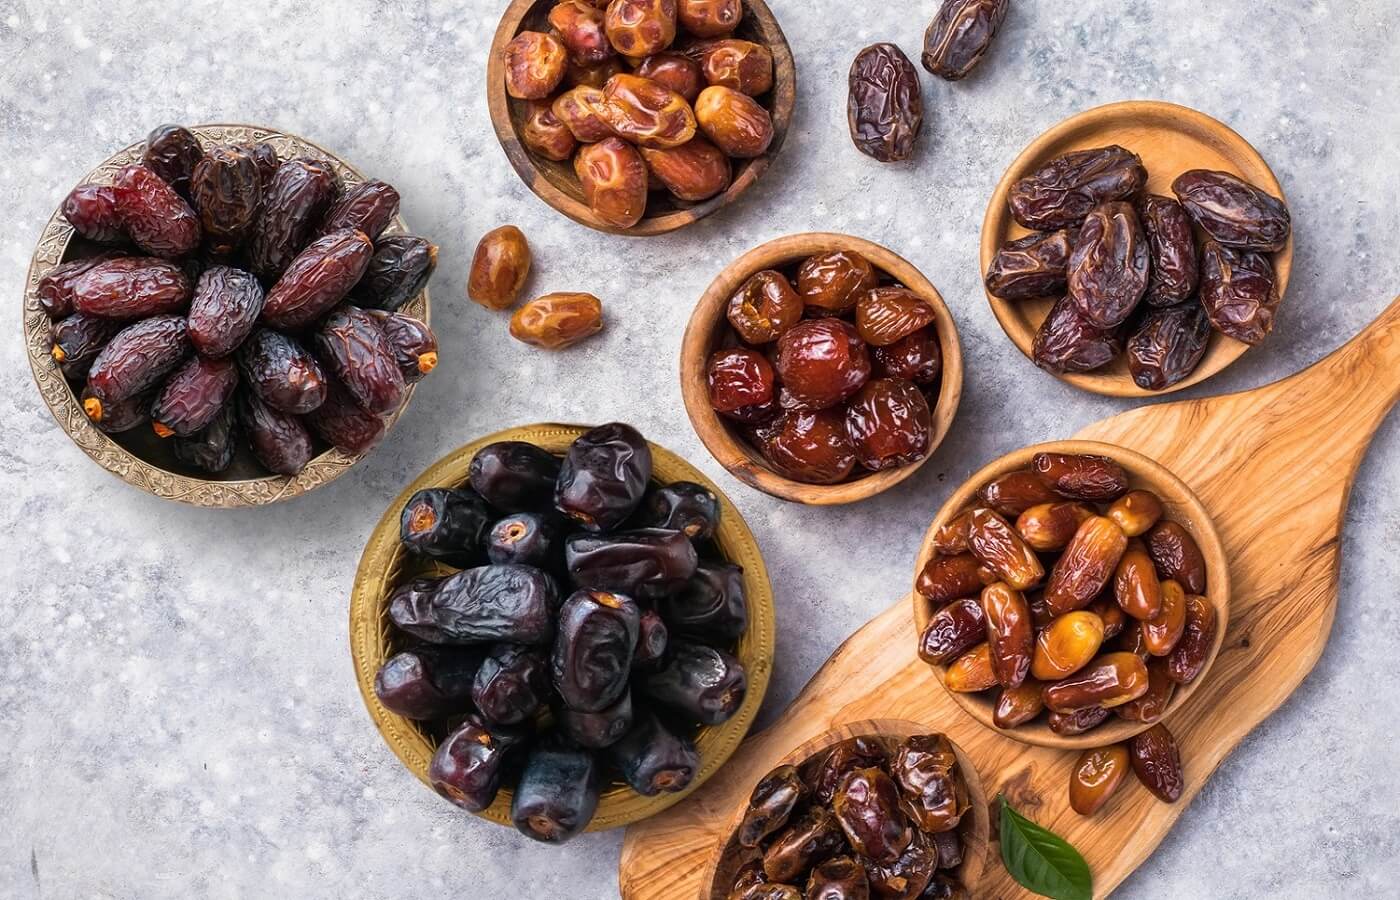 Production and consumption of dates in Iran - Nutex Dates - Grower‚ Packer‚ Exporter of Iran dates